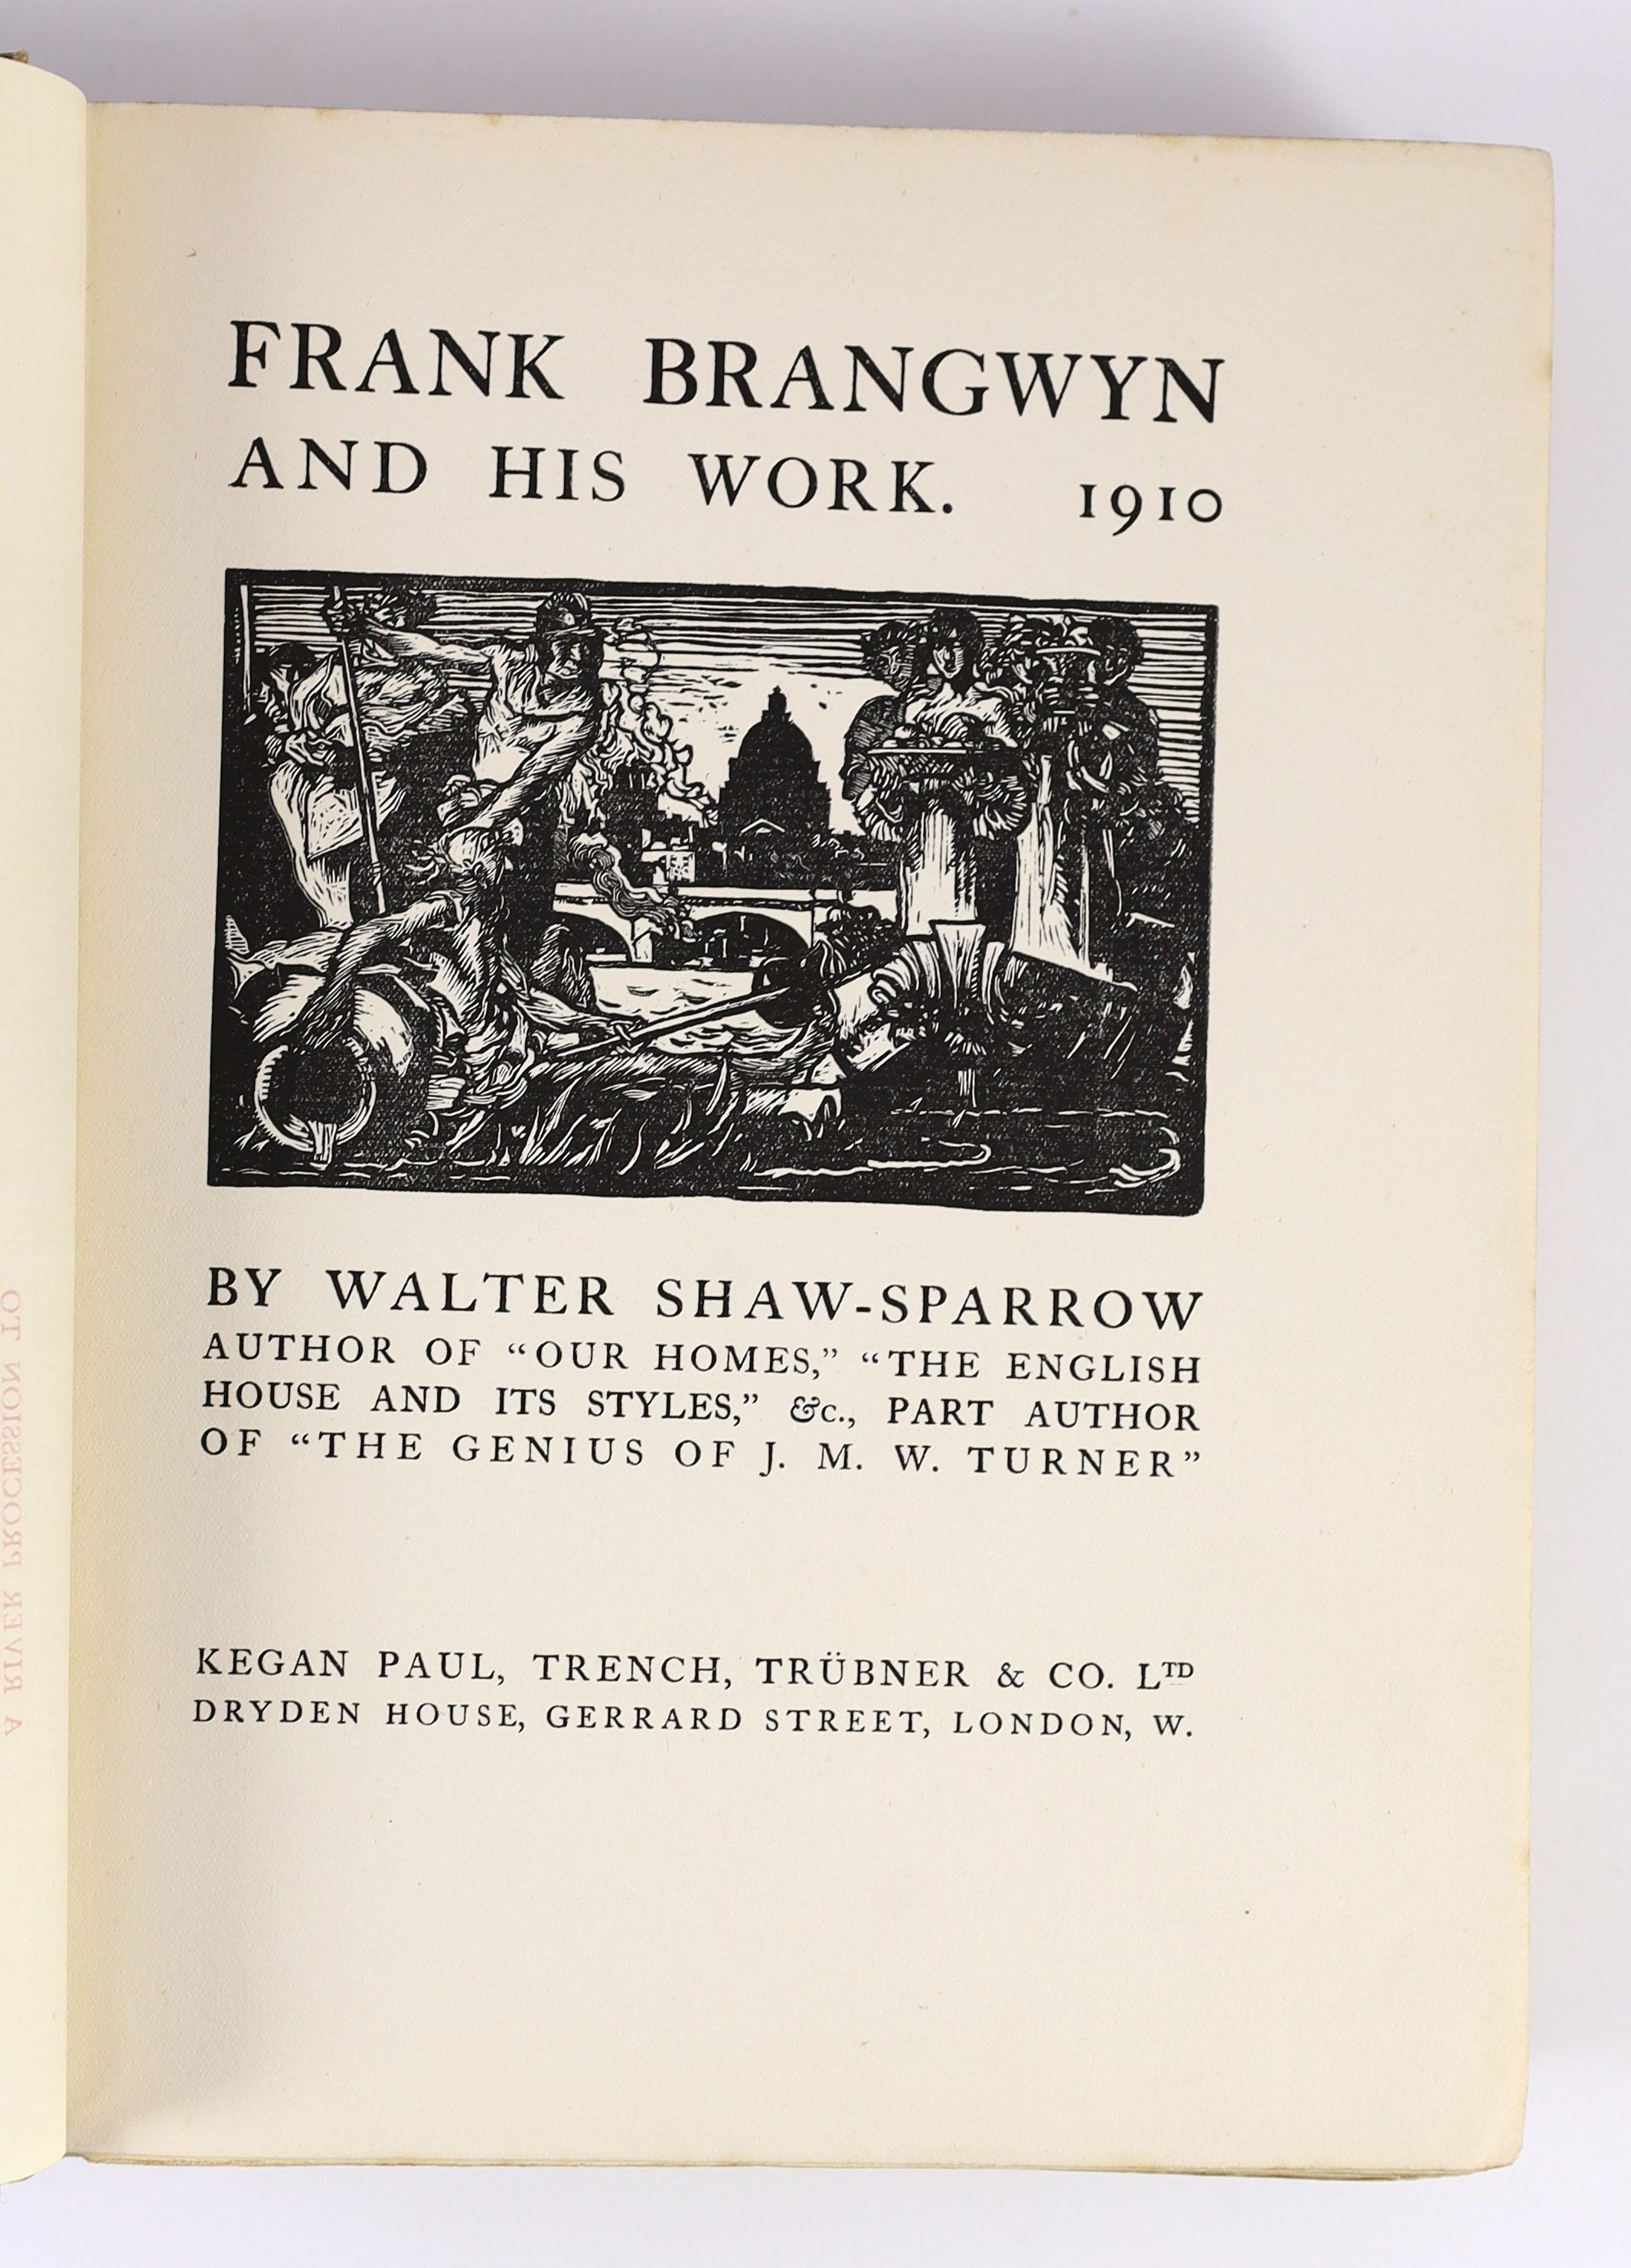 Shaw-Sparrow, Walter - Frank Brangwyn and His Work, with artist presentation inscription to front fly leaf, 4to, cloth with pictorial cover and 19 colour plates, London, 1910